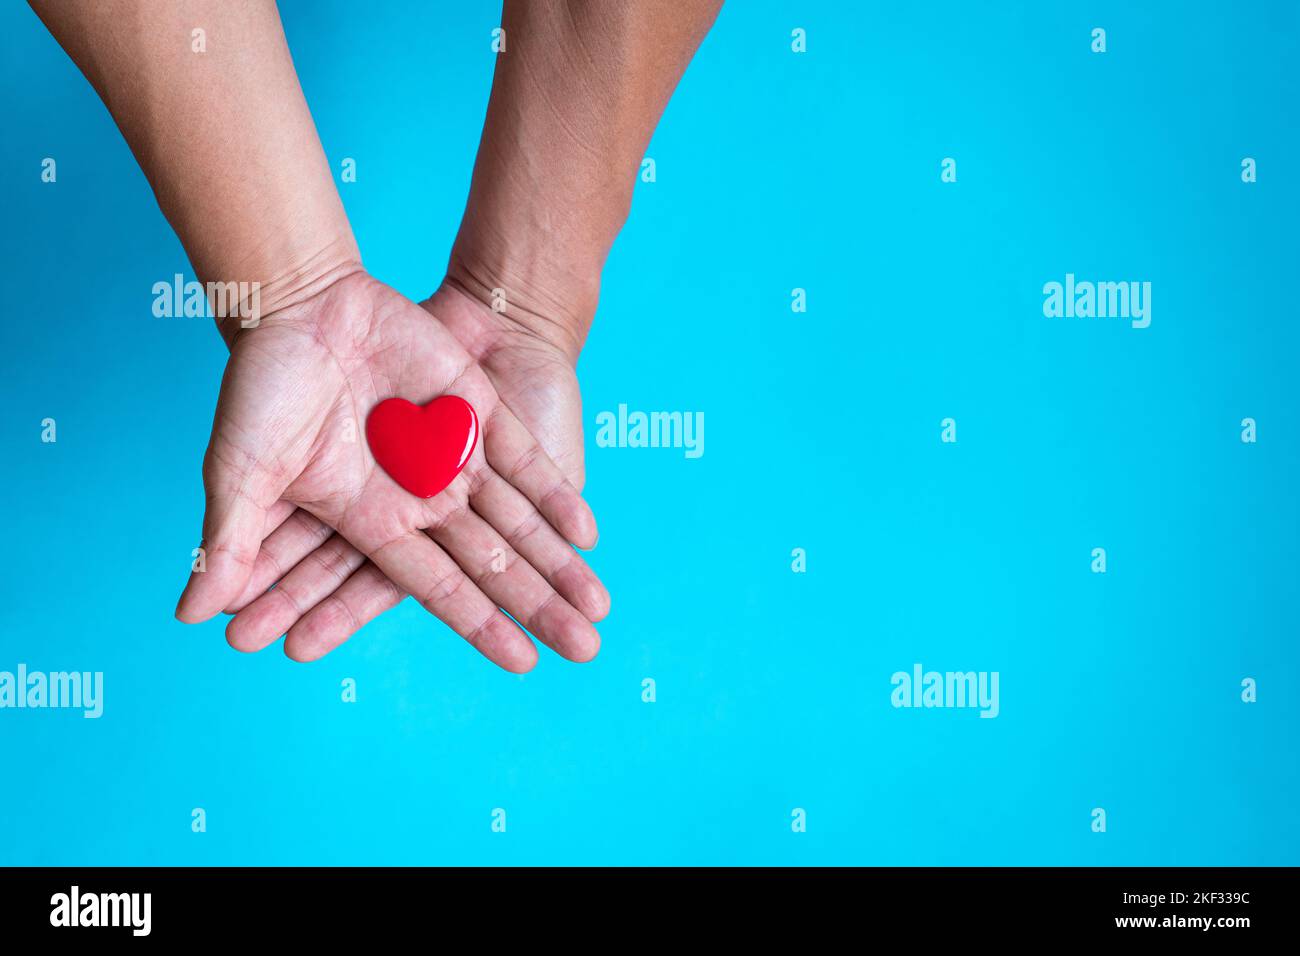 Heart health concept. Red heart shape on the palm of hand. Top view, copy space. Stock Photo